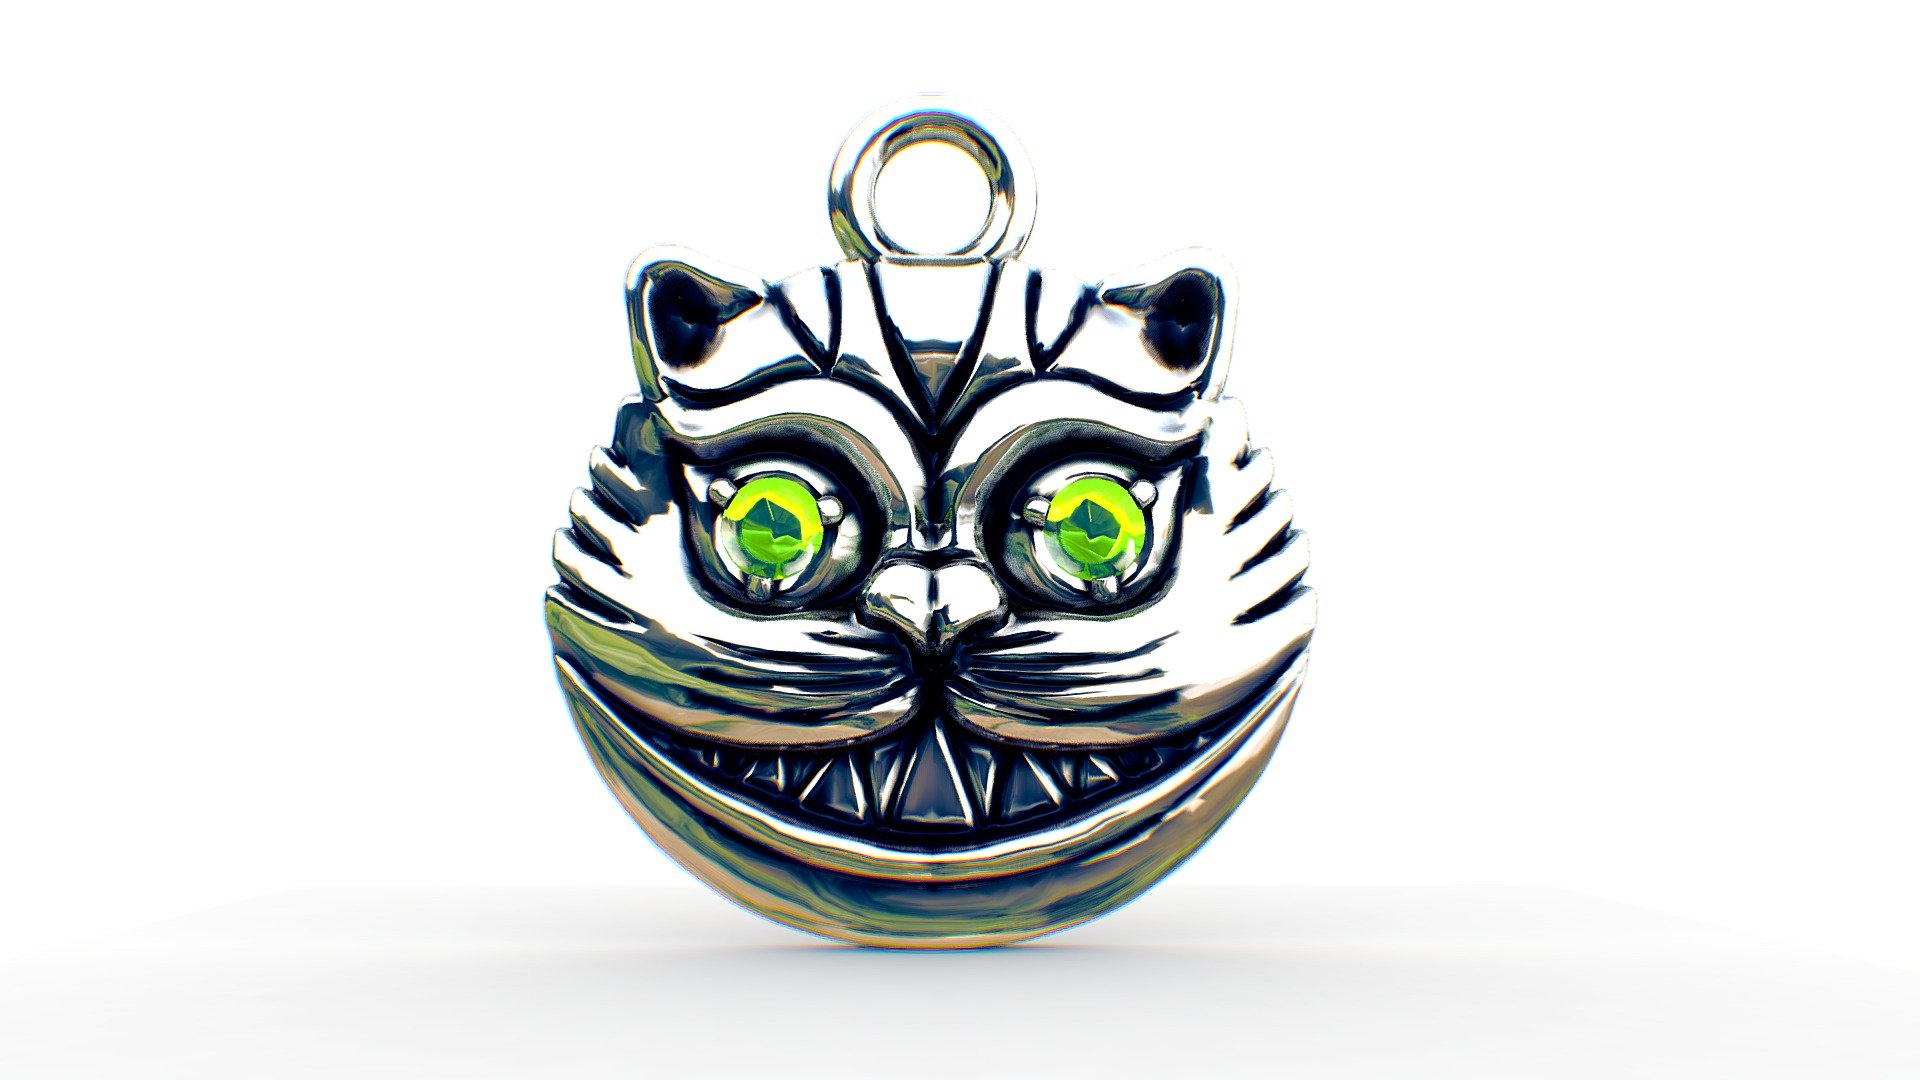 thickness 0.8
mass 3 gramm in silver
gems 2mm
size 16 on 19 mm
Author's work
© 2018 Mihail Burmistrov All Rights Reserved - Cheshire Cat - 3D model by Mihail Burmistrov (@mishkin79) 3d model